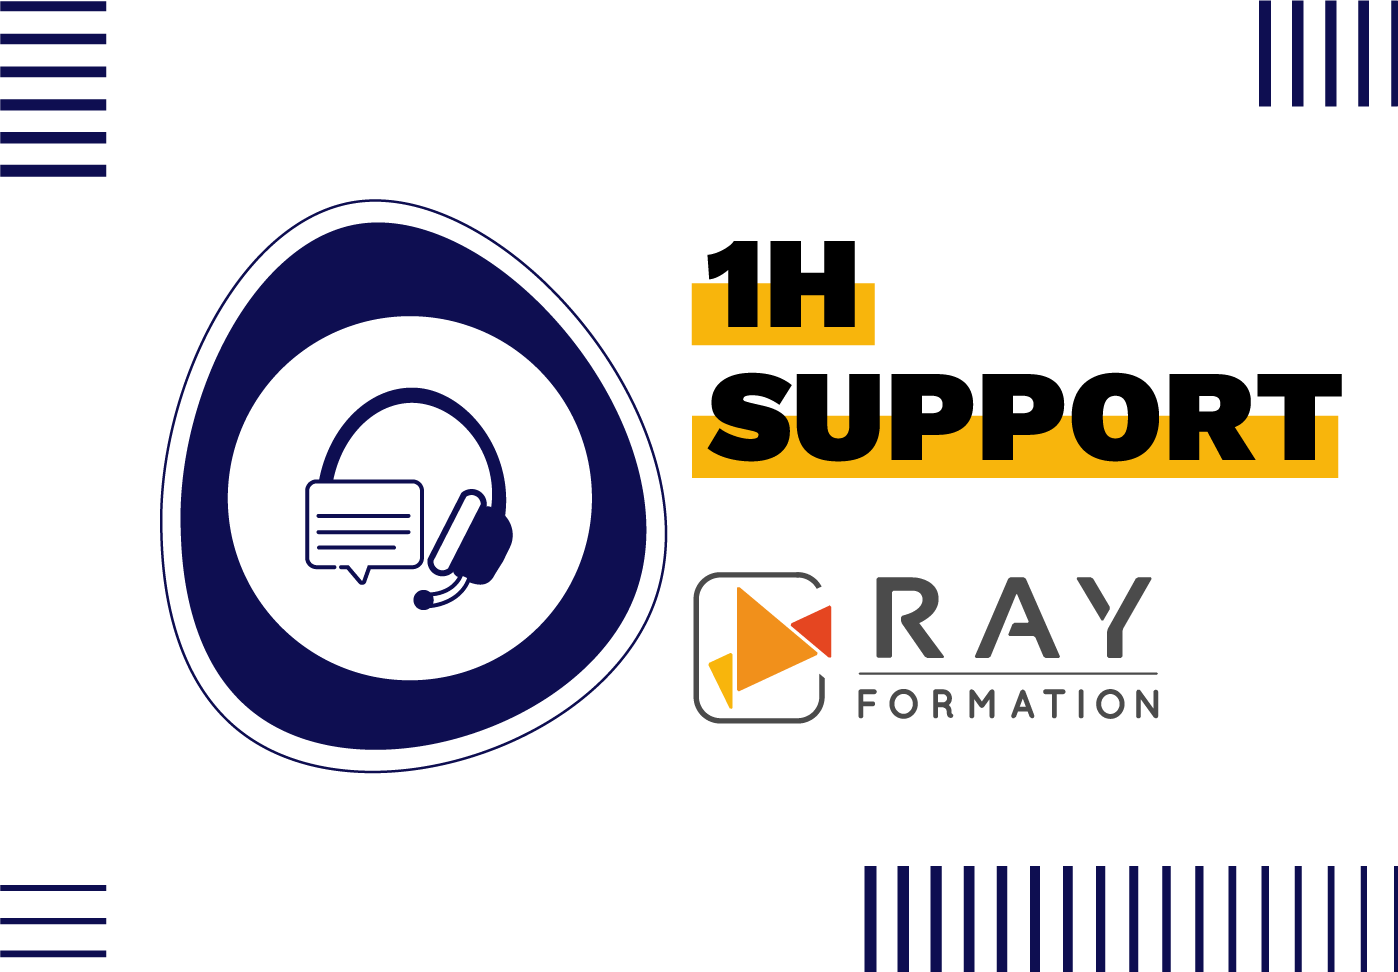 1h-support-ray-formation_282757018